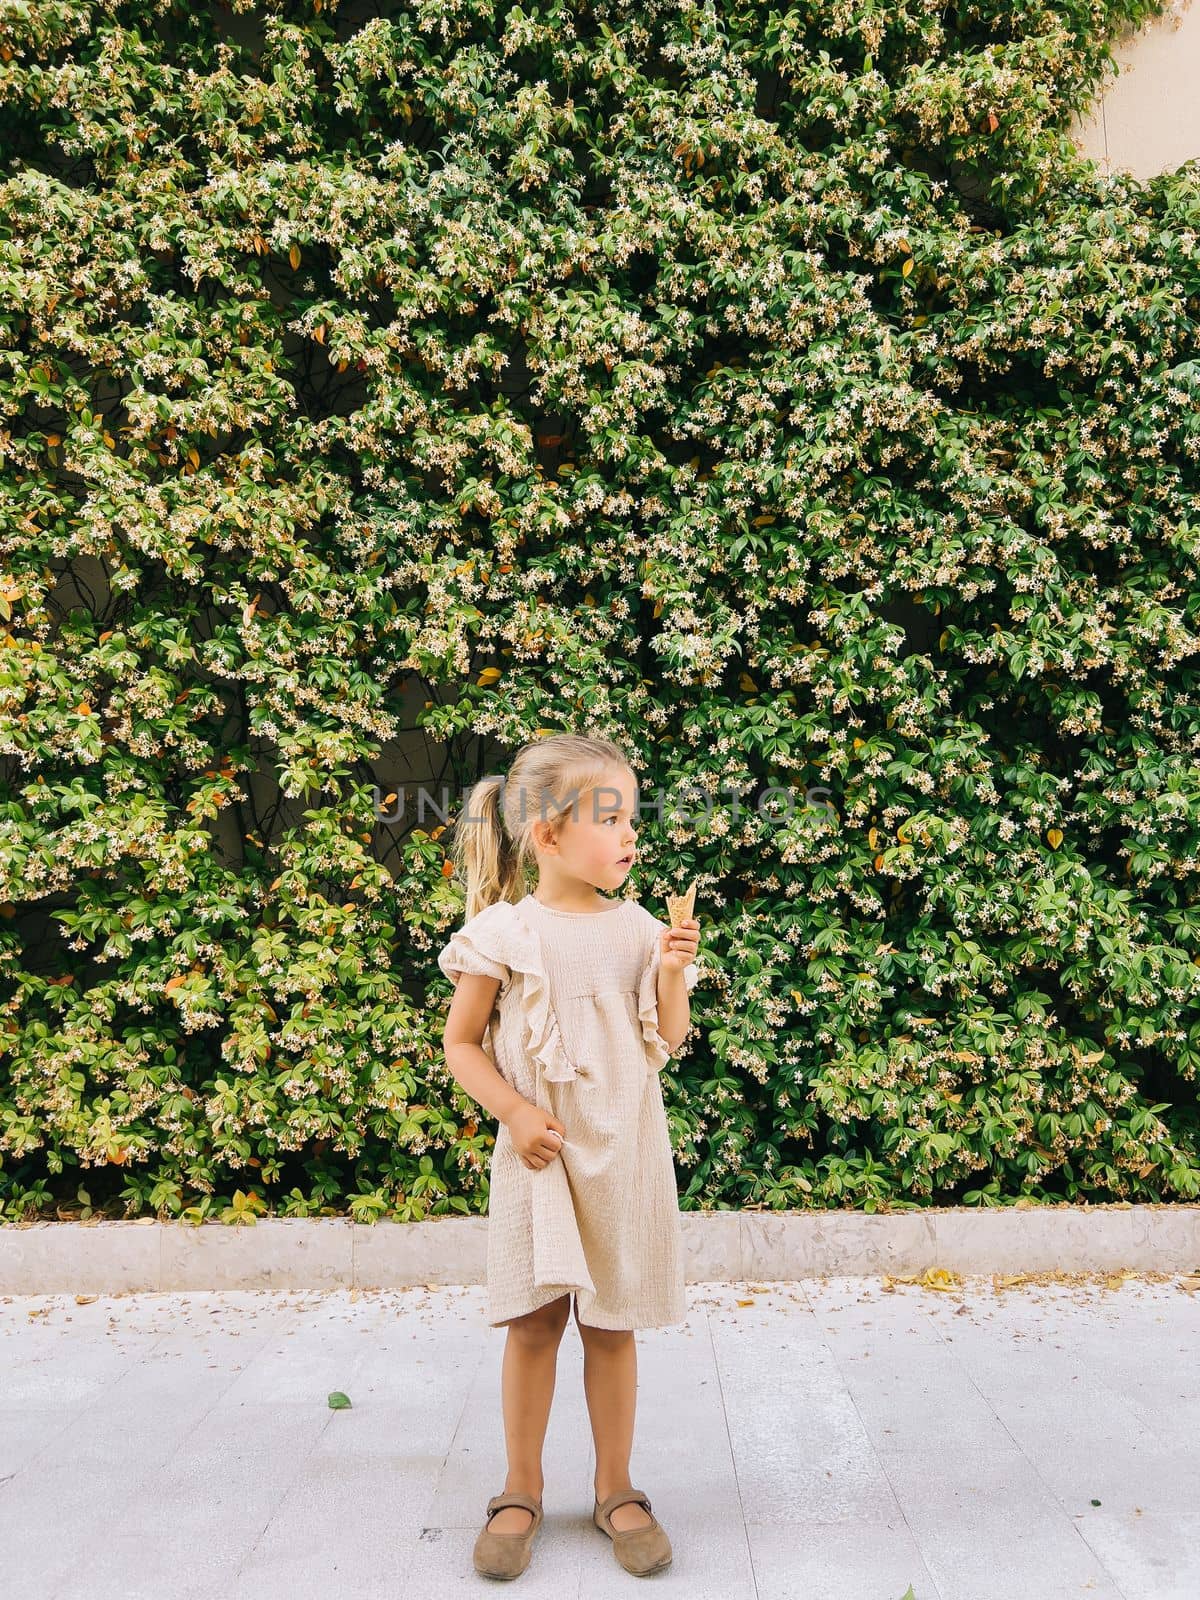 Little girl with an ice cream cone stands on a tile near a green hedge by Nadtochiy